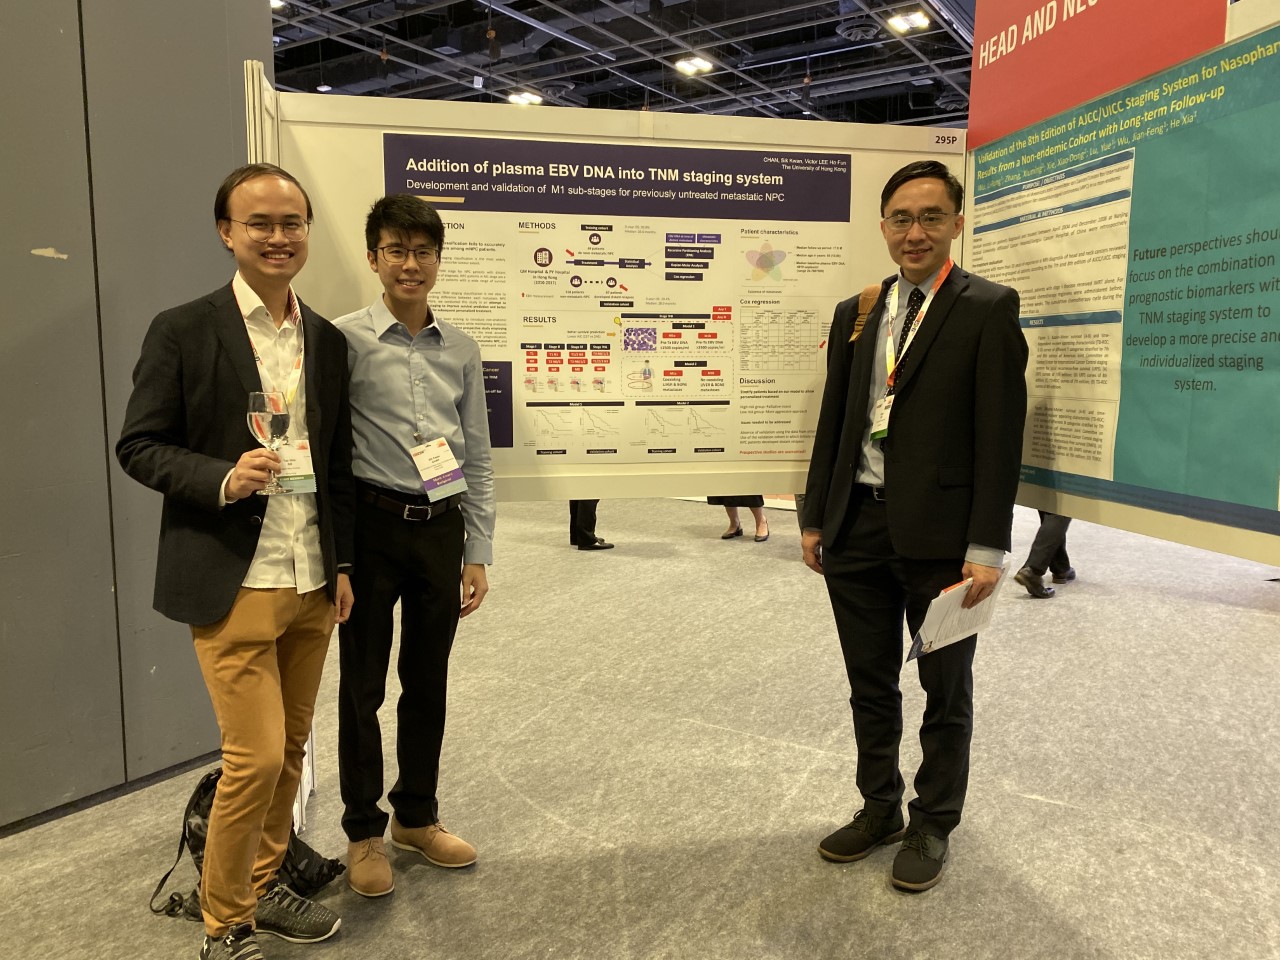 Dr Lee (right) and Dr Chan (middle) at the ESMO Asia 2019 Congress in Singapore